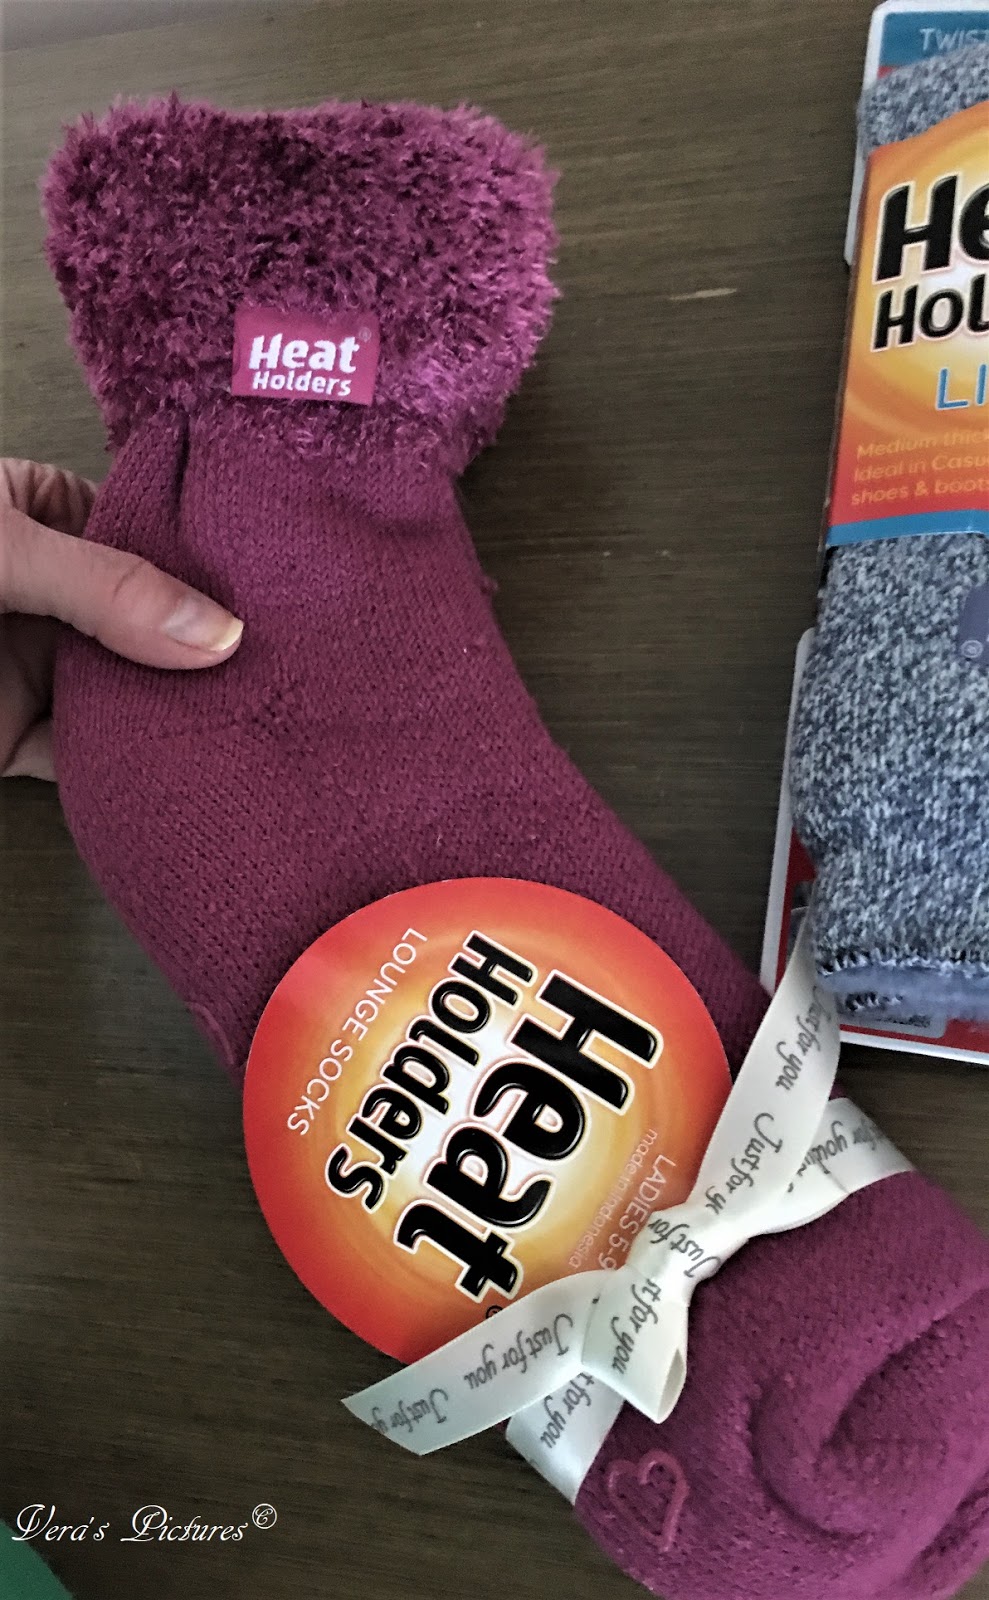 Chat with Vera: Heat Holders® The Warmest Thermal Sock! [Review